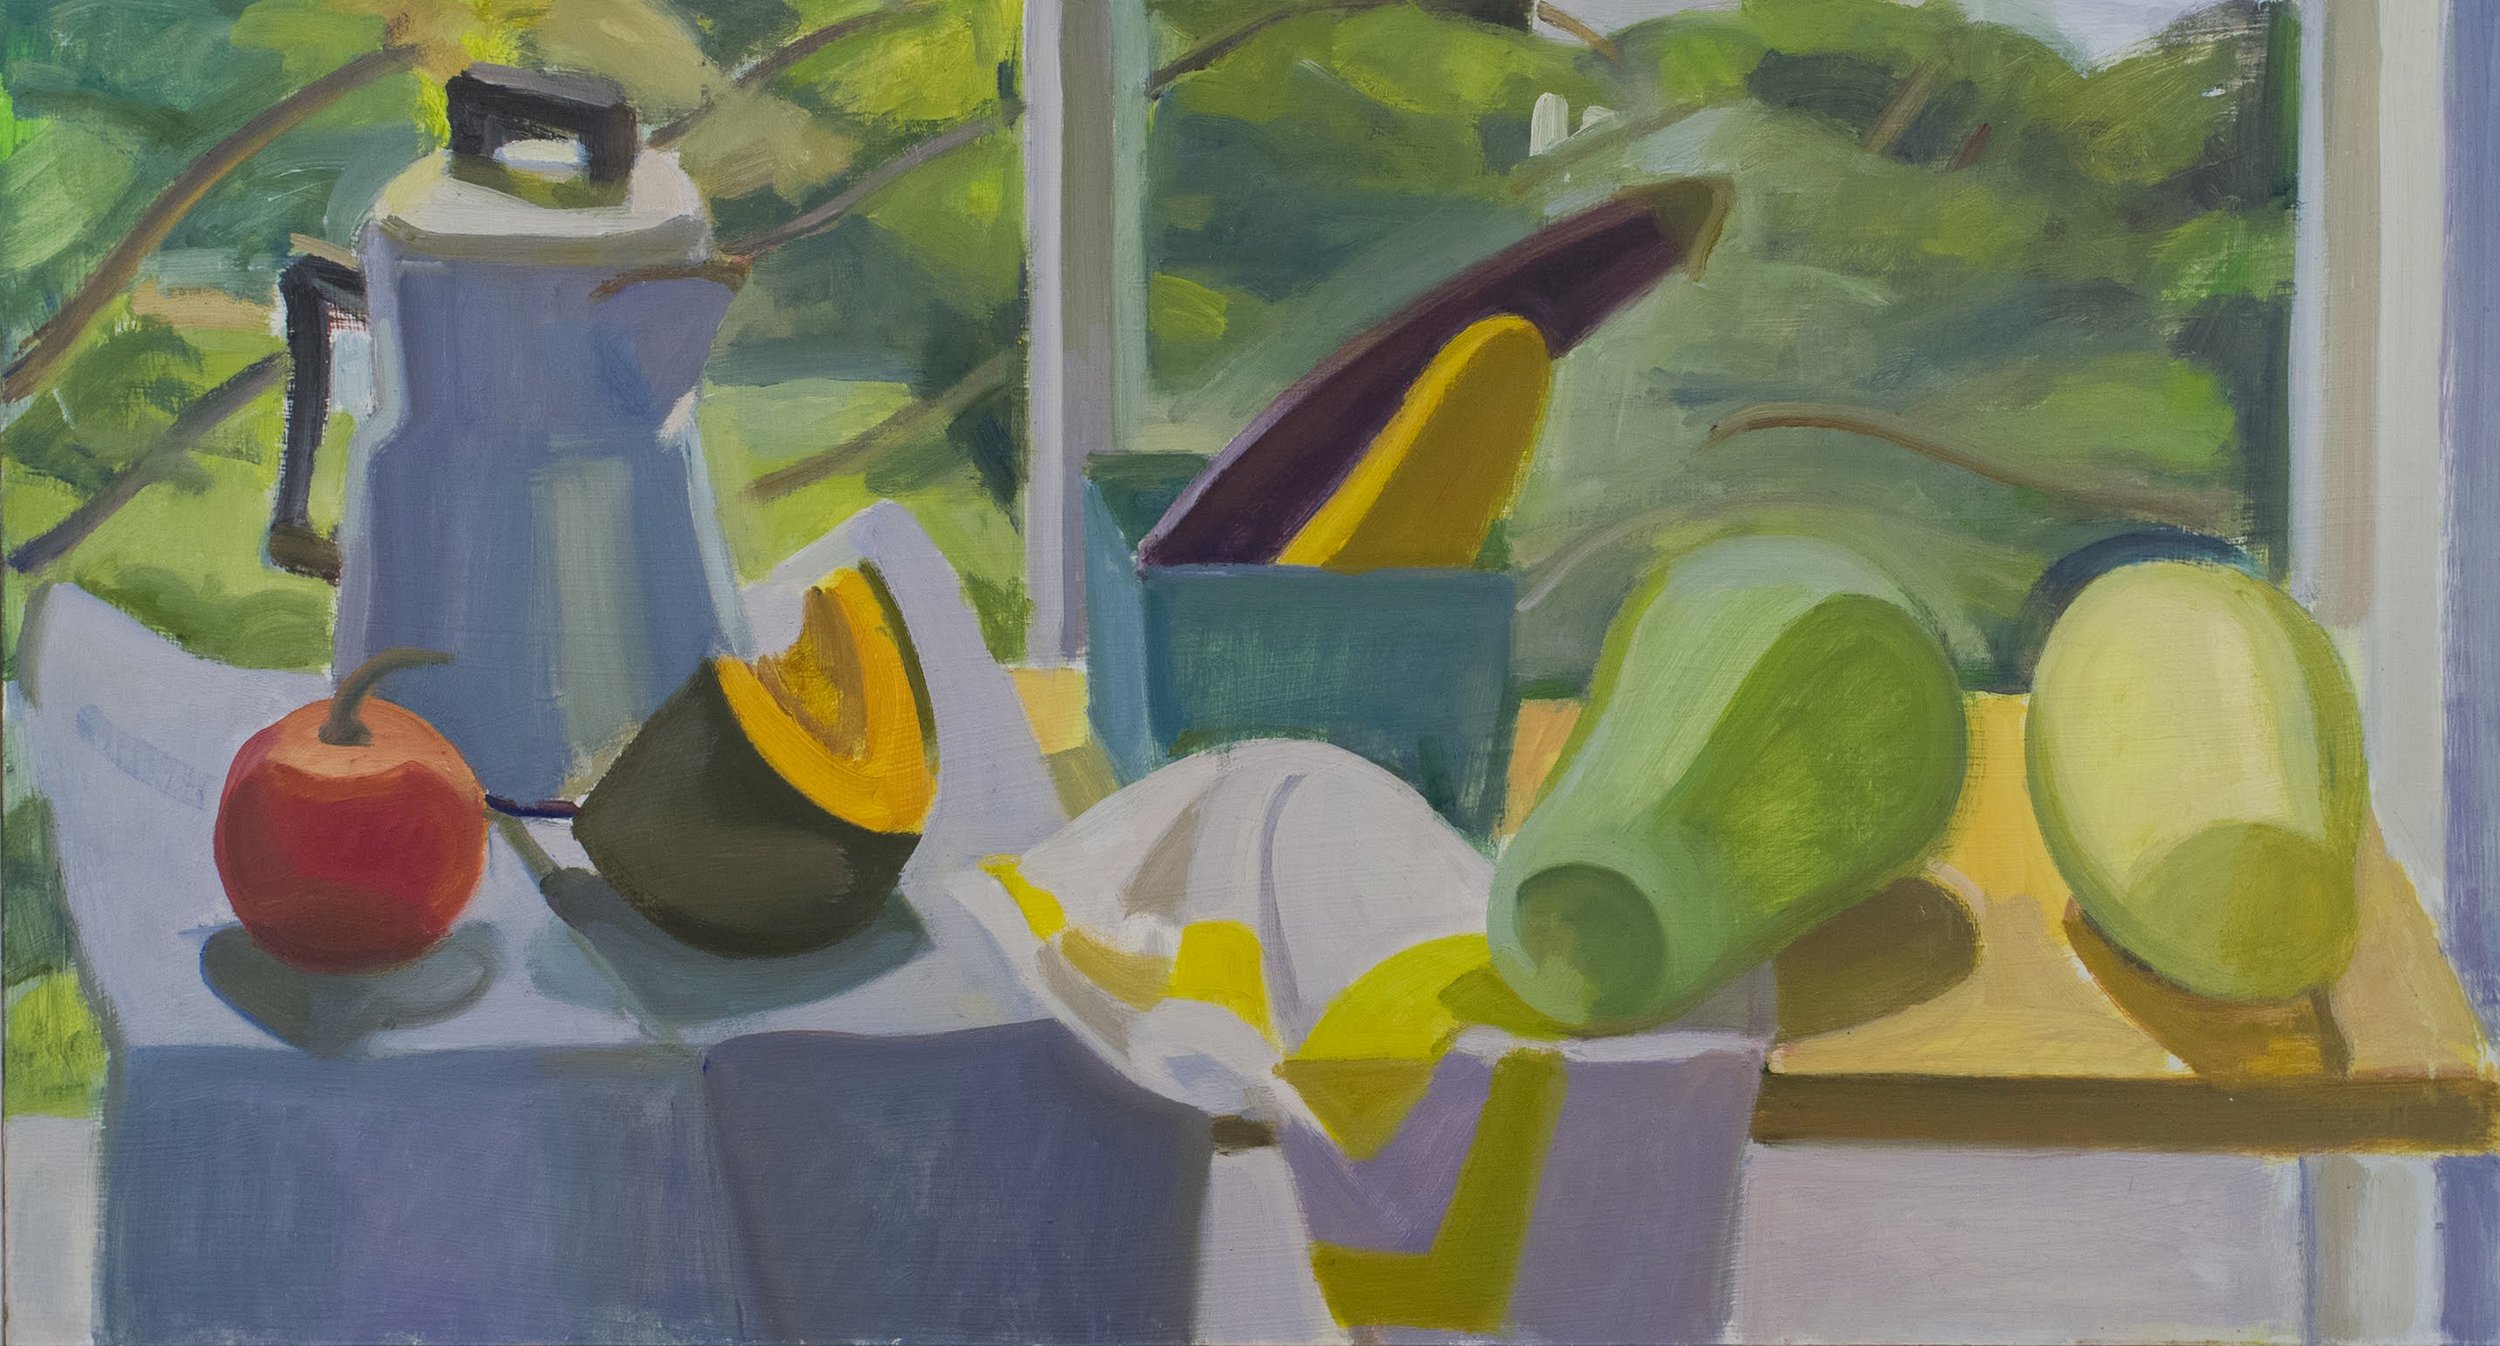   Percolator and Squash, Summer Studio , 2005, oil/panel, 12 x 22 in. (Not for sale) 